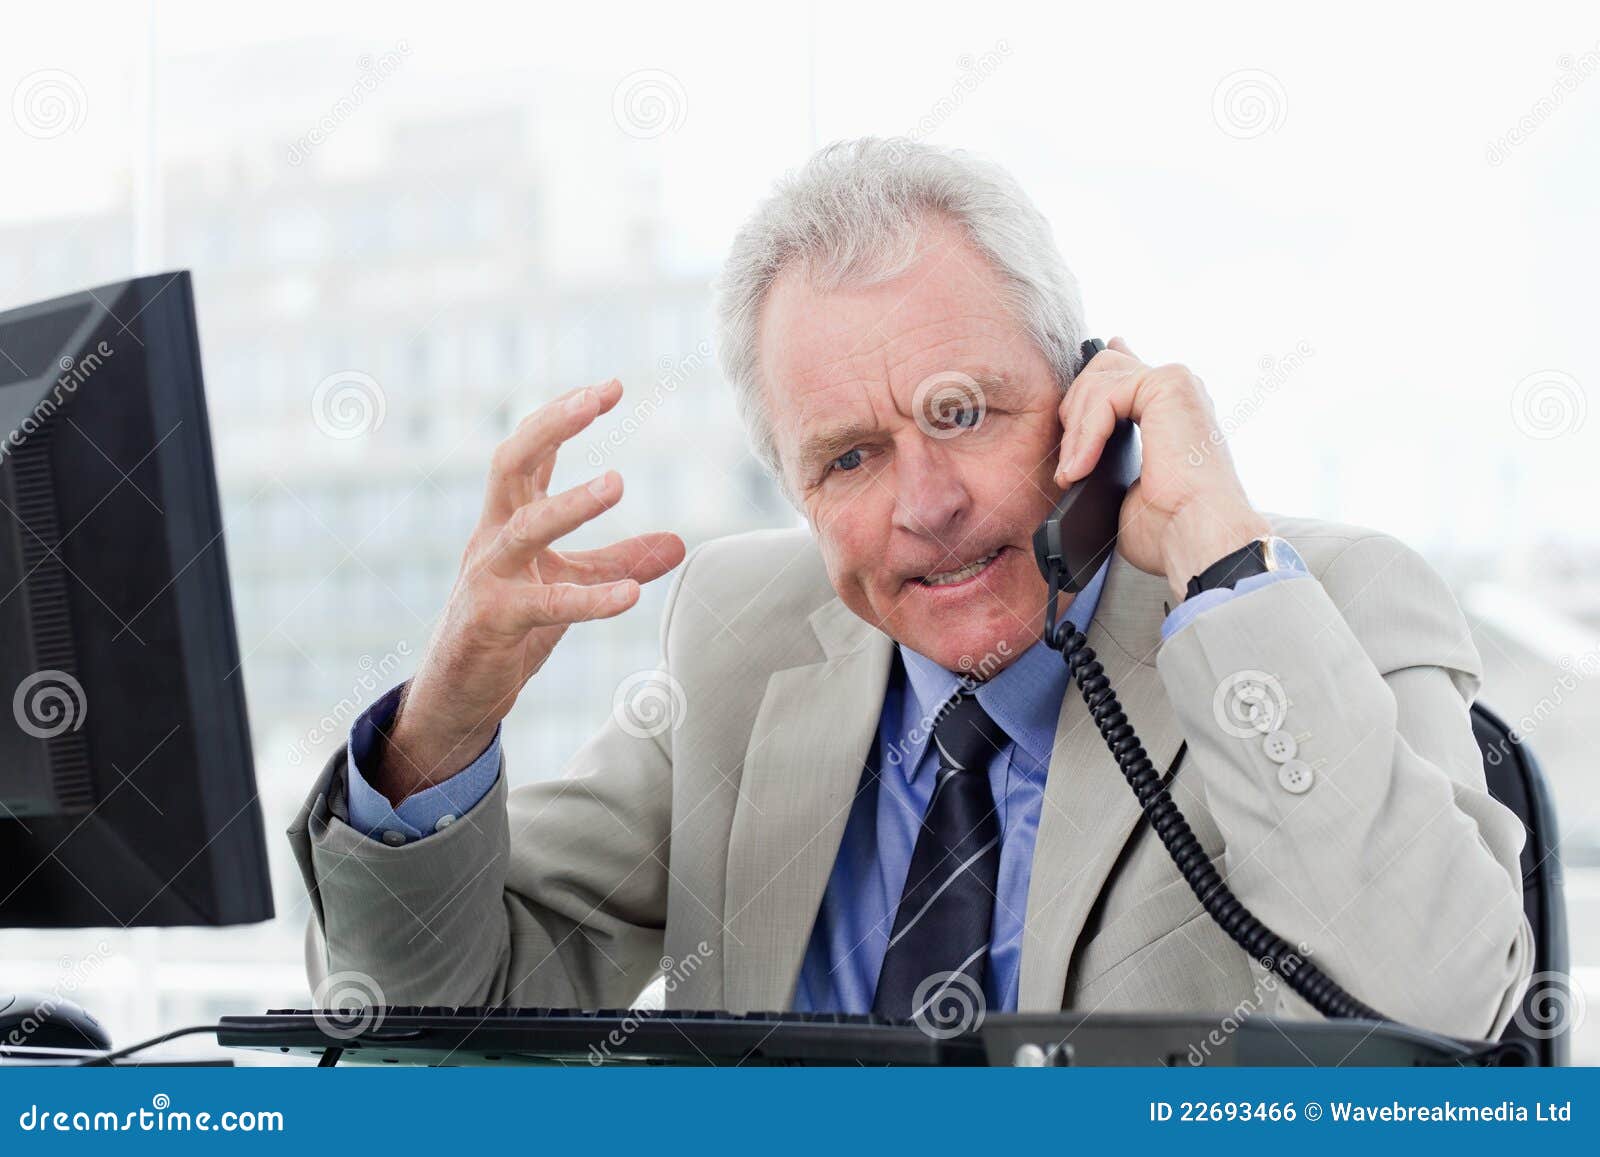 angry senior manager on the phone